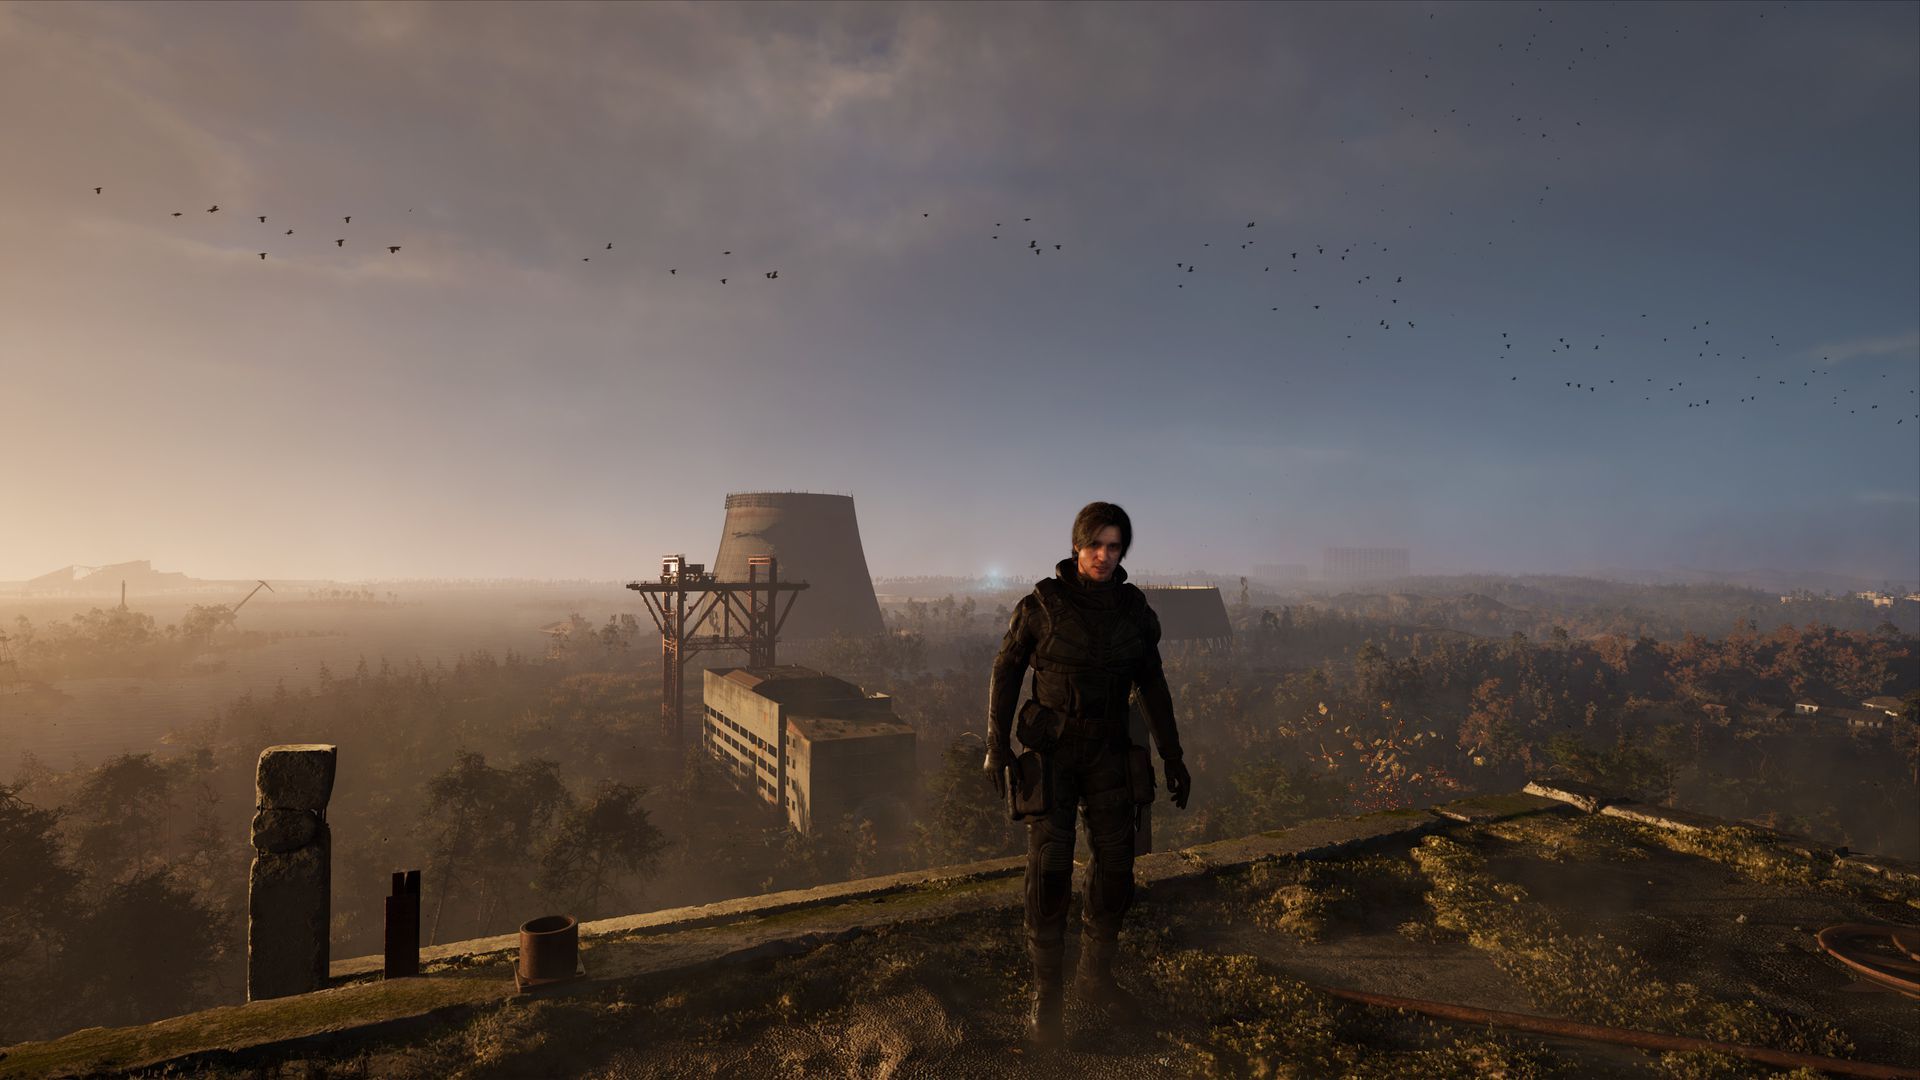 Screencap from a video game showing a character wearing black standing on a rooftop